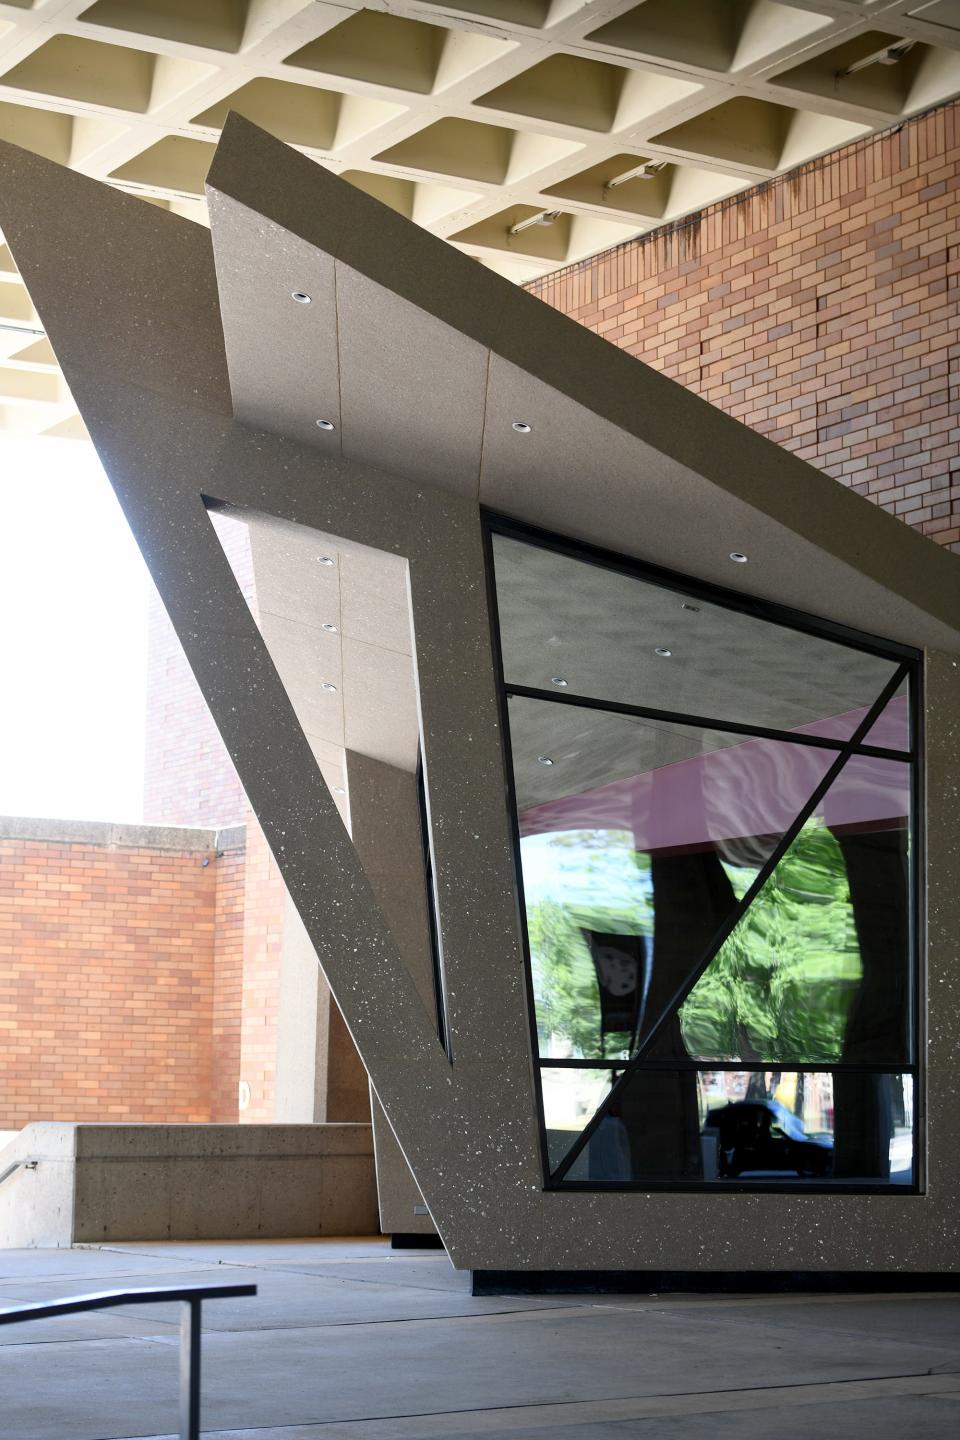 A new sculptural window is among the renovations and upgrades at the Cultural Center for the Arts in downtown Canton. The window features an artistic design and adds space to the exit area for the theater.